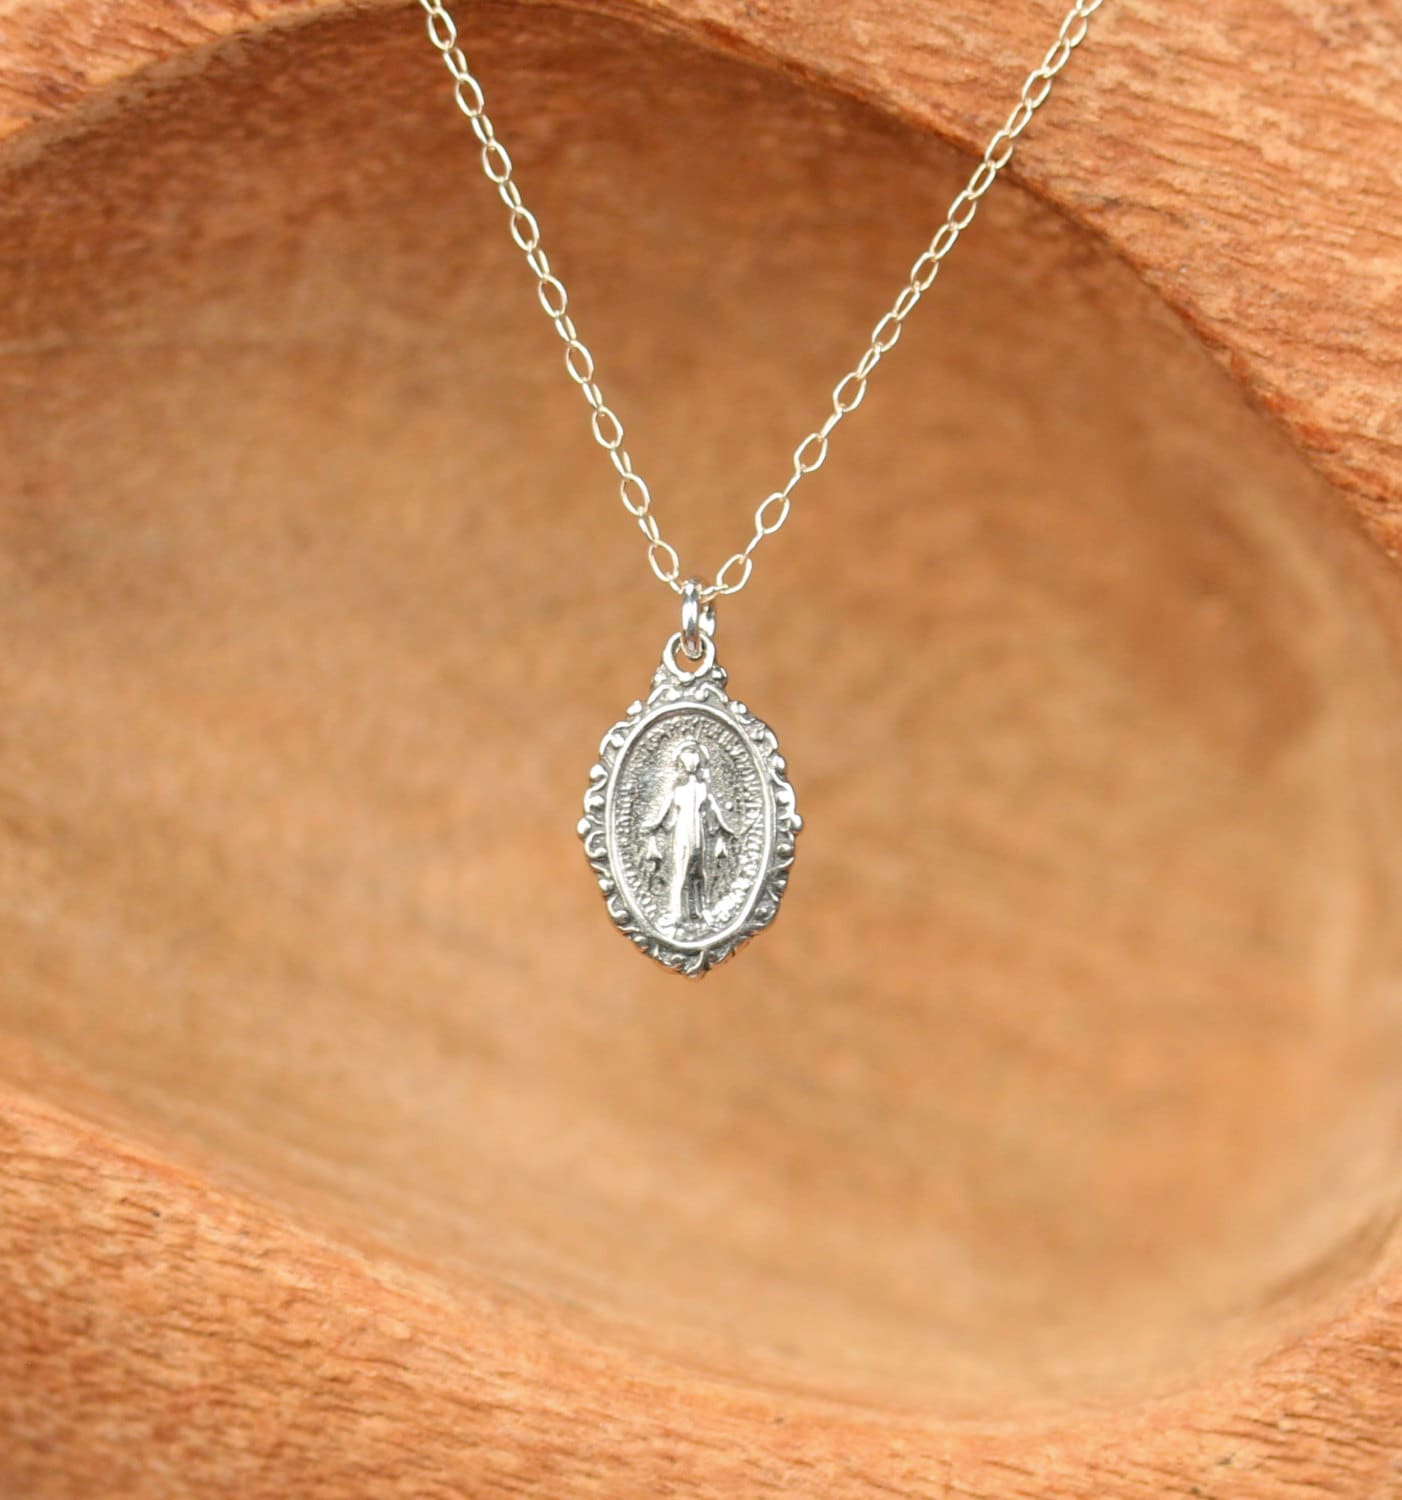 OEMOO Stainless Steel Virgin Mary Necklace, Medal India | Ubuy